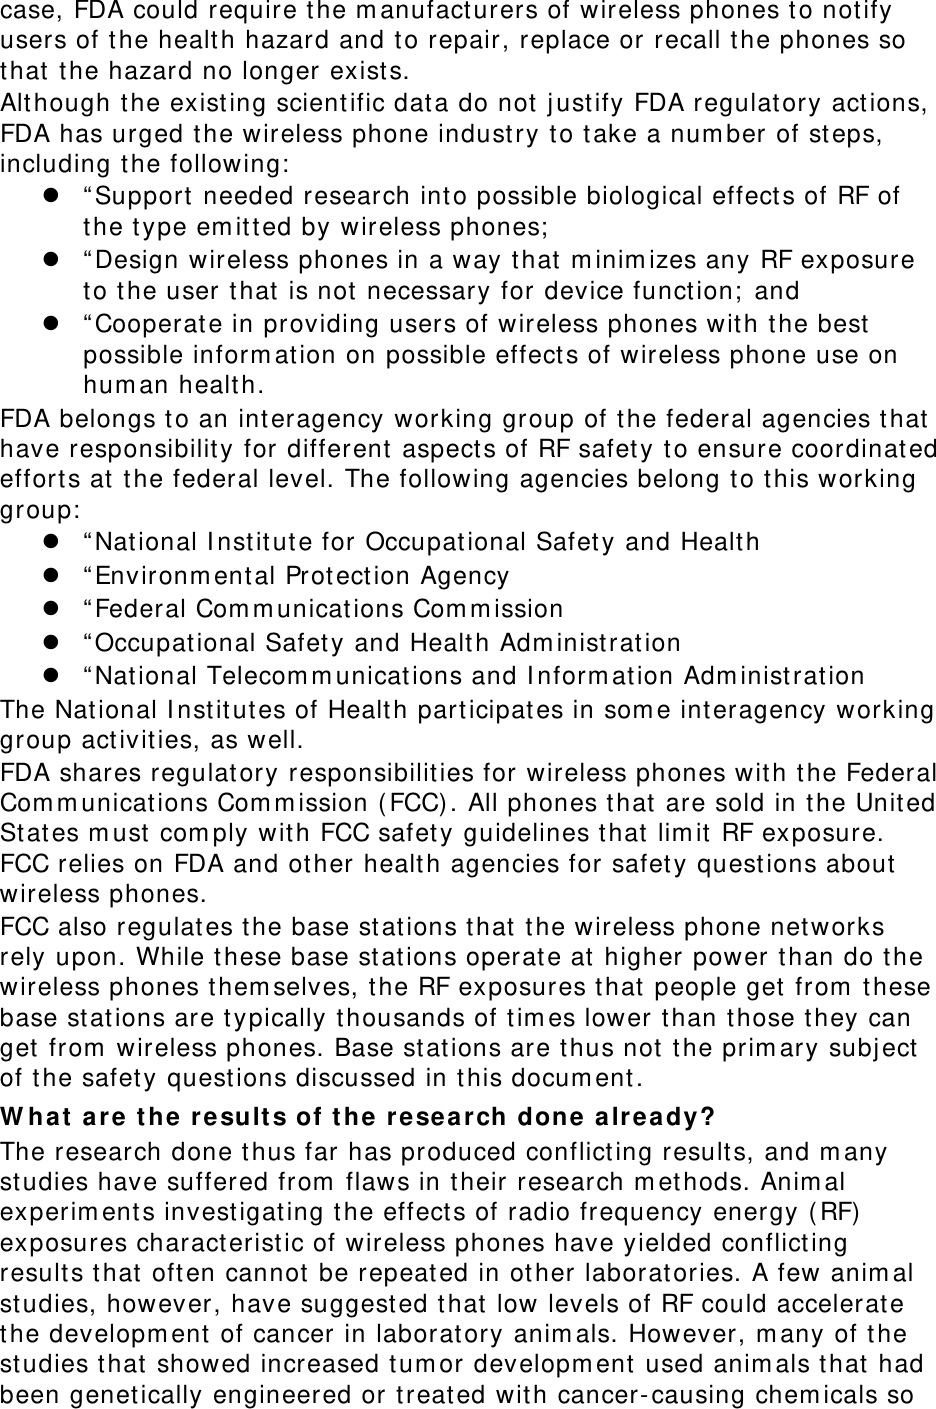 case, FDA could require the manufacturers of wireless phones to notify users of the health hazard and to repair, replace or recall the phones so that the hazard no longer exists. Although the existing scientific data do not justify FDA regulatory actions, FDA has urged the wireless phone industry to take a number of steps, including the following:  “Support needed research into possible biological effects of RF of the type emitted by wireless phones;  “Design wireless phones in a way that minimizes any RF exposure to the user that is not necessary for device function; and  “Cooperate in providing users of wireless phones with the best possible information on possible effects of wireless phone use on human health. FDA belongs to an interagency working group of the federal agencies that have responsibility for different aspects of RF safety to ensure coordinated efforts at the federal level. The following agencies belong to this working group:  “National Institute for Occupational Safety and Health  “Environmental Protection Agency  “Federal Communications Commission  “Occupational Safety and Health Administration  “National Telecommunications and Information Administration The National Institutes of Health participates in some interagency working group activities, as well. FDA shares regulatory responsibilities for wireless phones with the Federal Communications Commission (FCC). All phones that are sold in the United States must comply with FCC safety guidelines that limit RF exposure. FCC relies on FDA and other health agencies for safety questions about wireless phones. FCC also regulates the base stations that the wireless phone networks rely upon. While these base stations operate at higher power than do the wireless phones themselves, the RF exposures that people get from these base stations are typically thousands of times lower than those they can get from wireless phones. Base stations are thus not the primary subject of the safety questions discussed in this document. What are the results of the research done already? The research done thus far has produced conflicting results, and many studies have suffered from flaws in their research methods. Animal experiments investigating the effects of radio frequency energy (RF) exposures characteristic of wireless phones have yielded conflicting results that often cannot be repeated in other laboratories. A few animal studies, however, have suggested that low levels of RF could accelerate the development of cancer in laboratory animals. However, many of the studies that showed increased tumor development used animals that had been genetically engineered or treated with cancer-causing chemicals so 